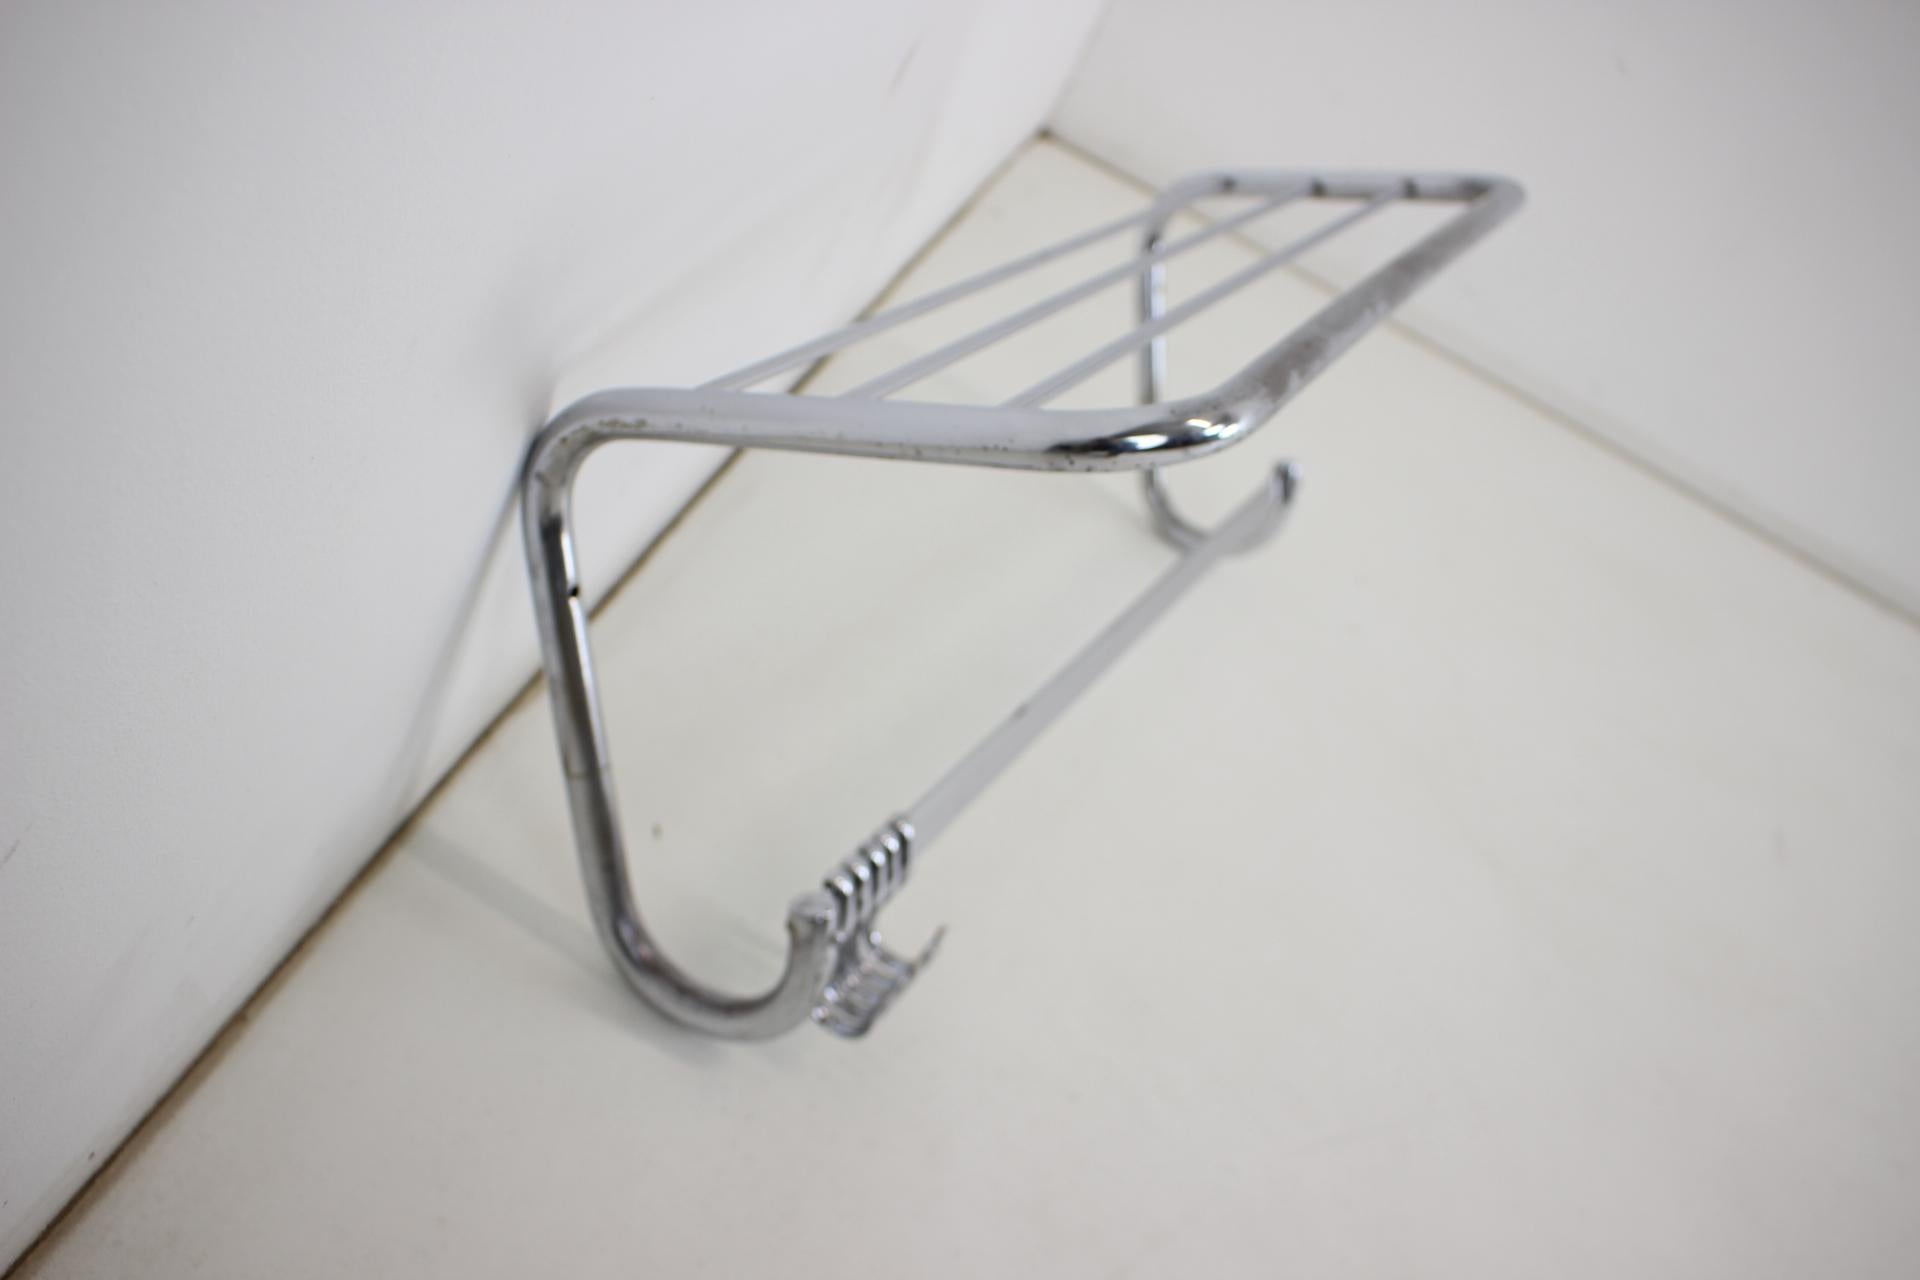 Chrome wall coat and hat hanger from former Czechoslovakia, made in th 1930's. Good condition patina